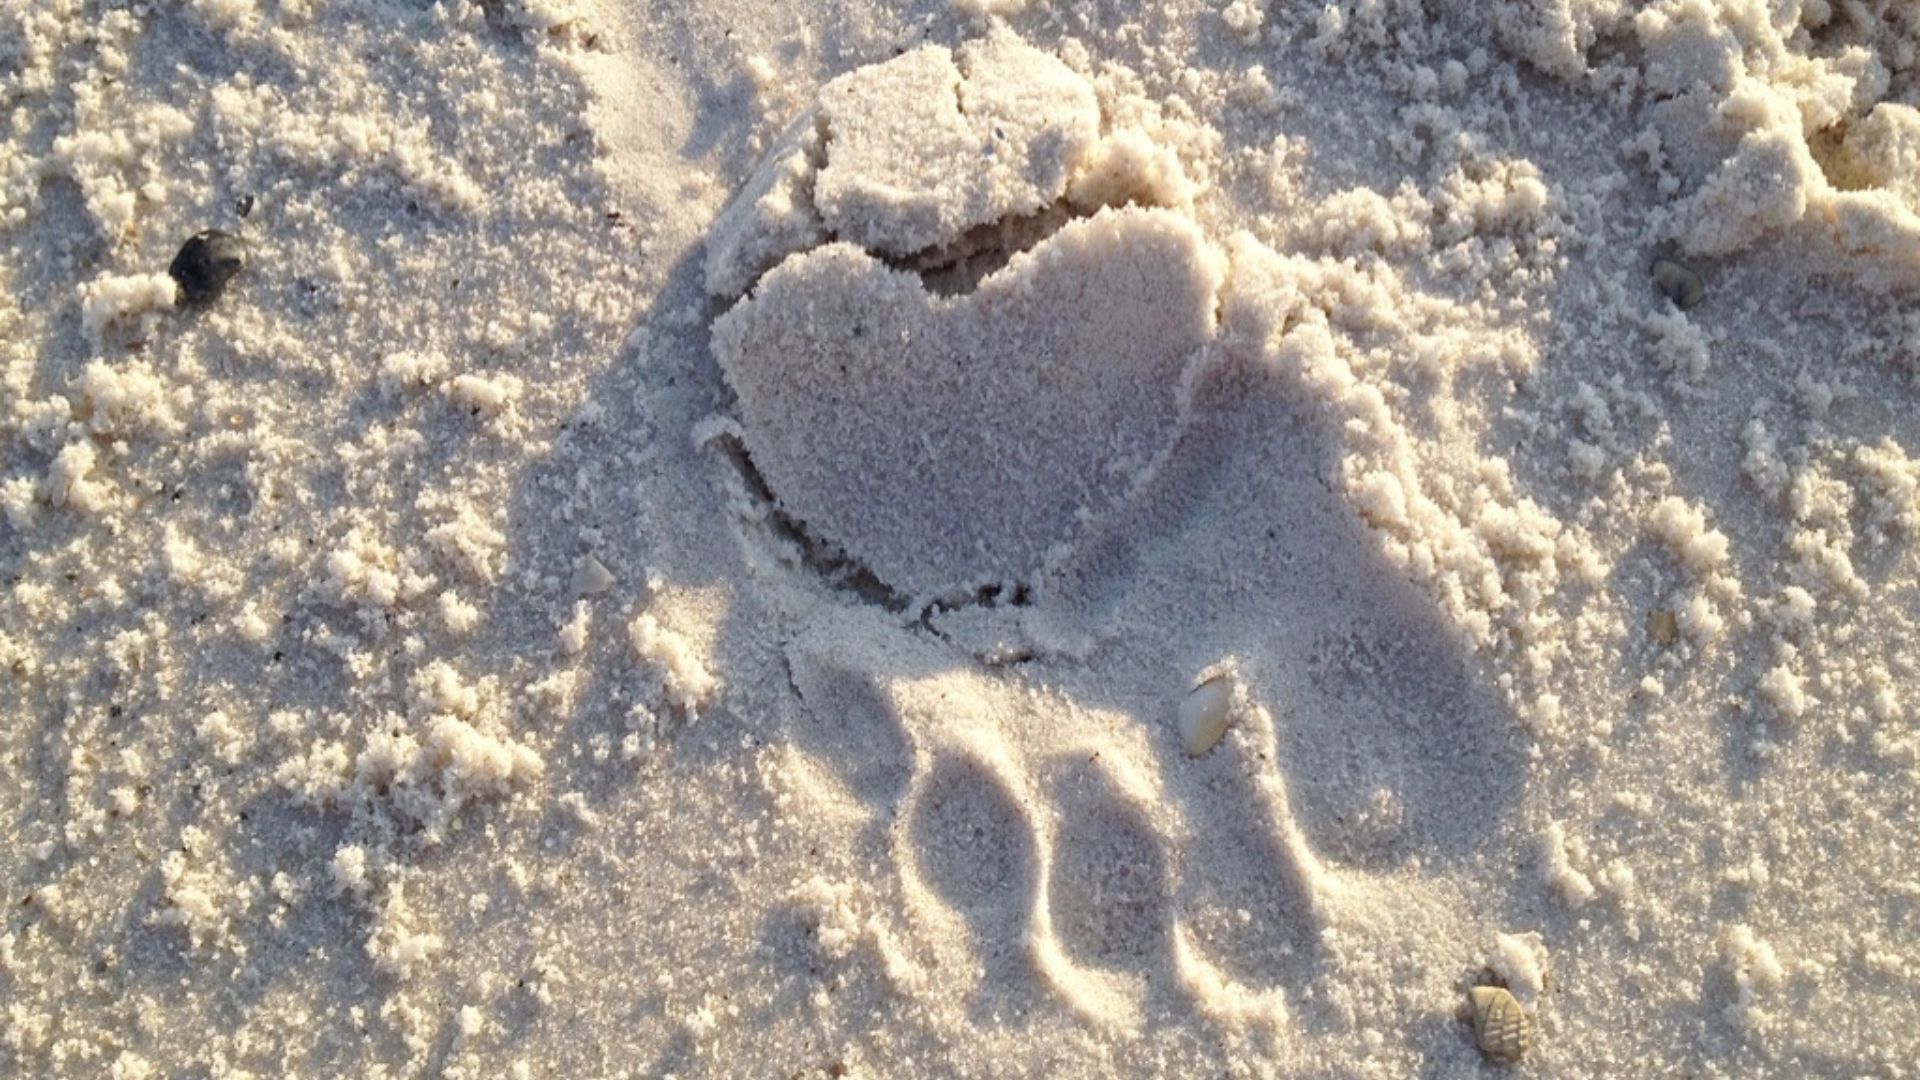 footprint in the sand where the heel is a heart